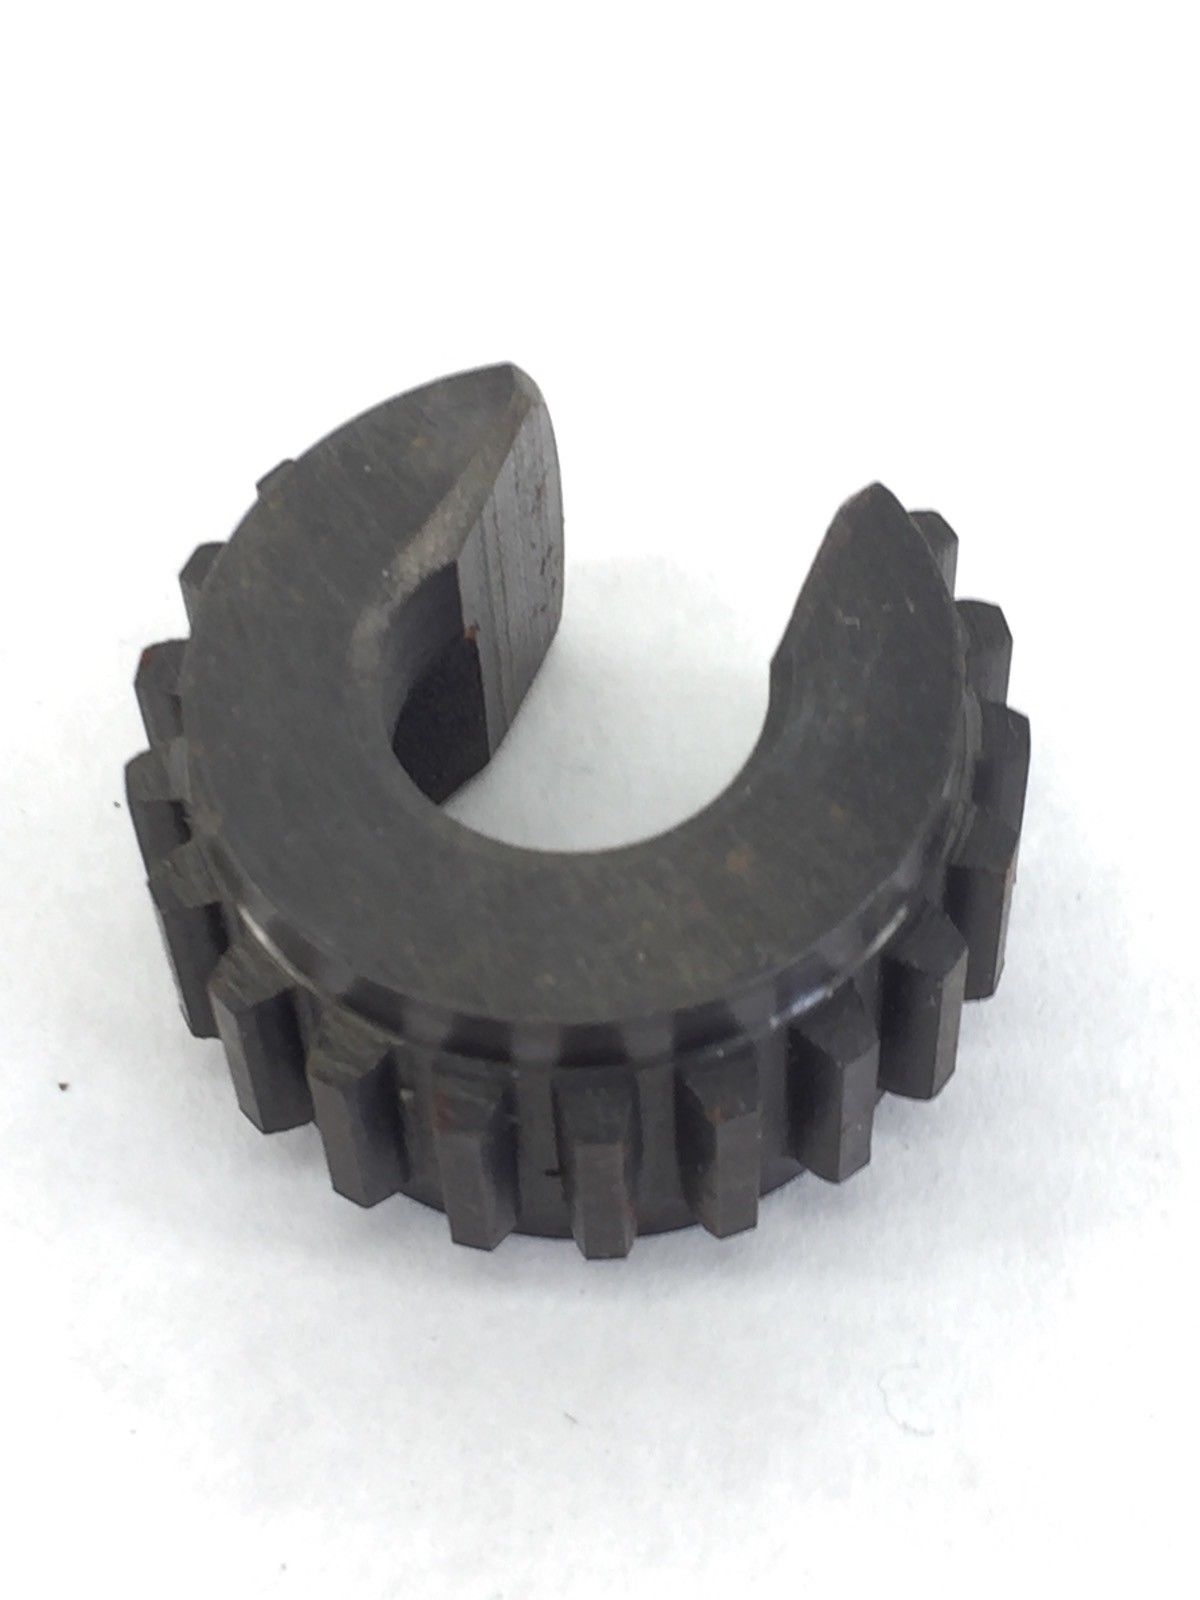 NEW! C SHAPED GEARs 20C 18T 12mm BORE 30mm O.D